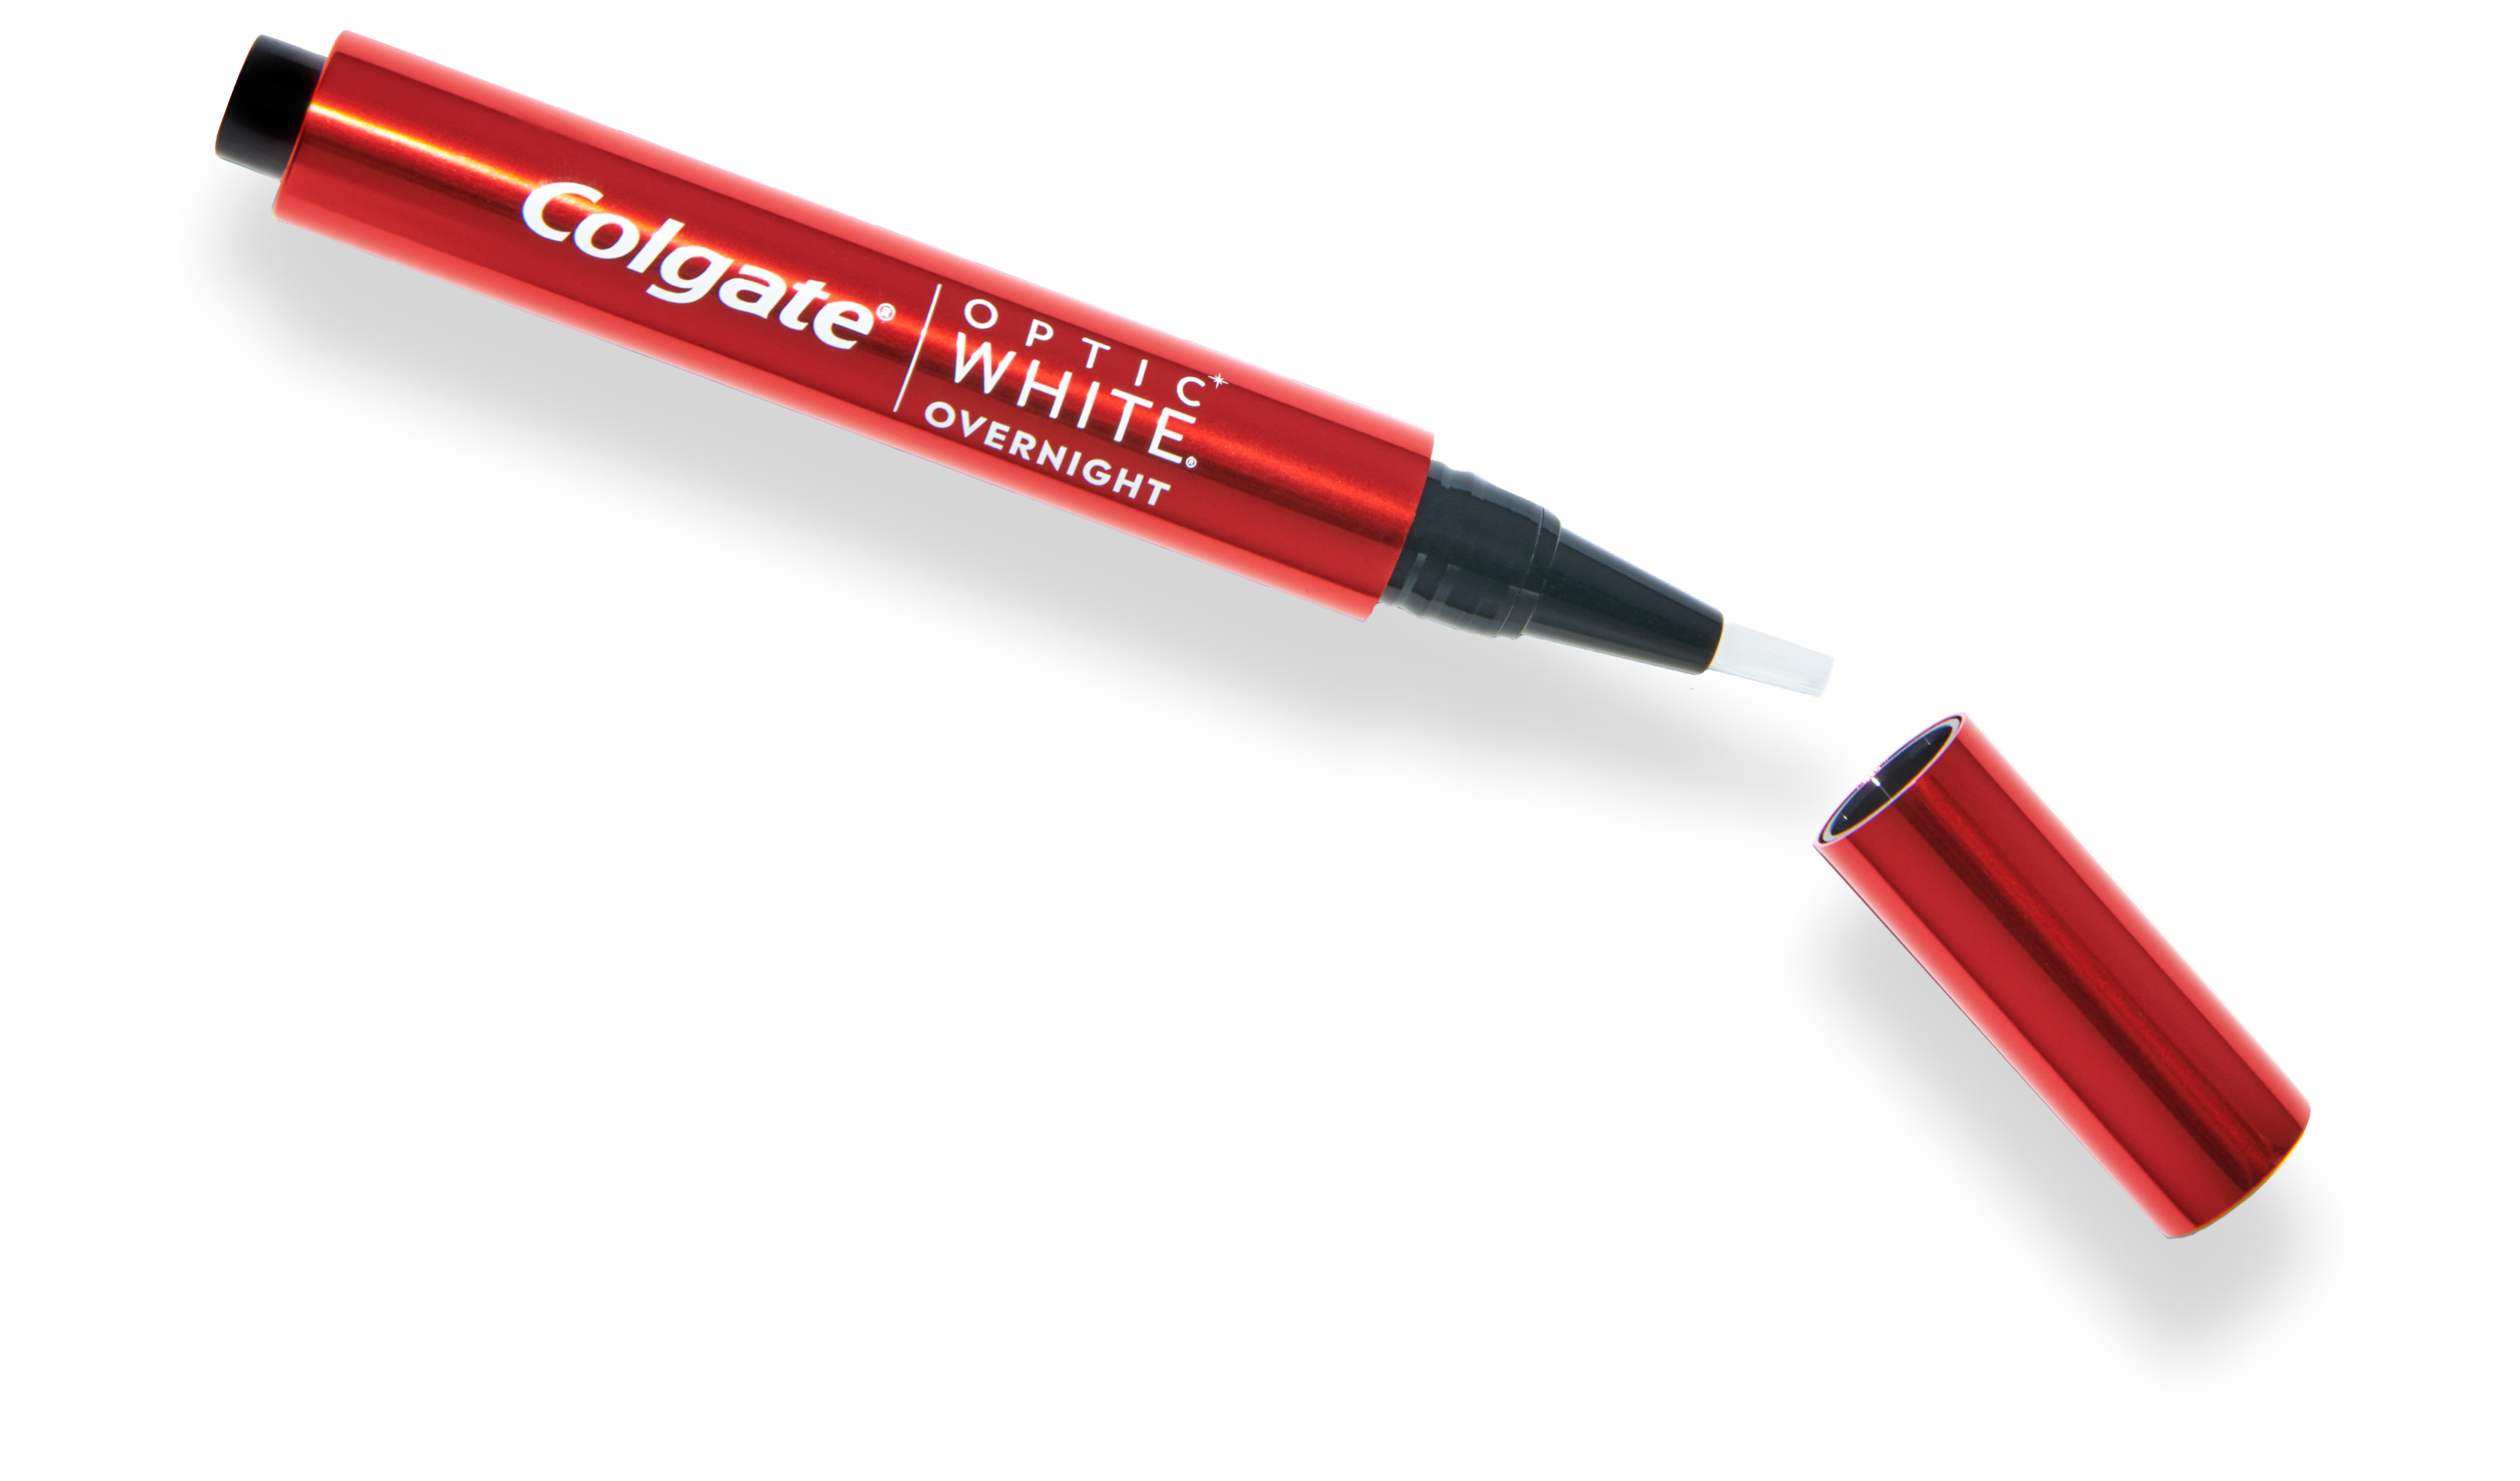 with the Colgate Optic White Overnight Whitening Pen